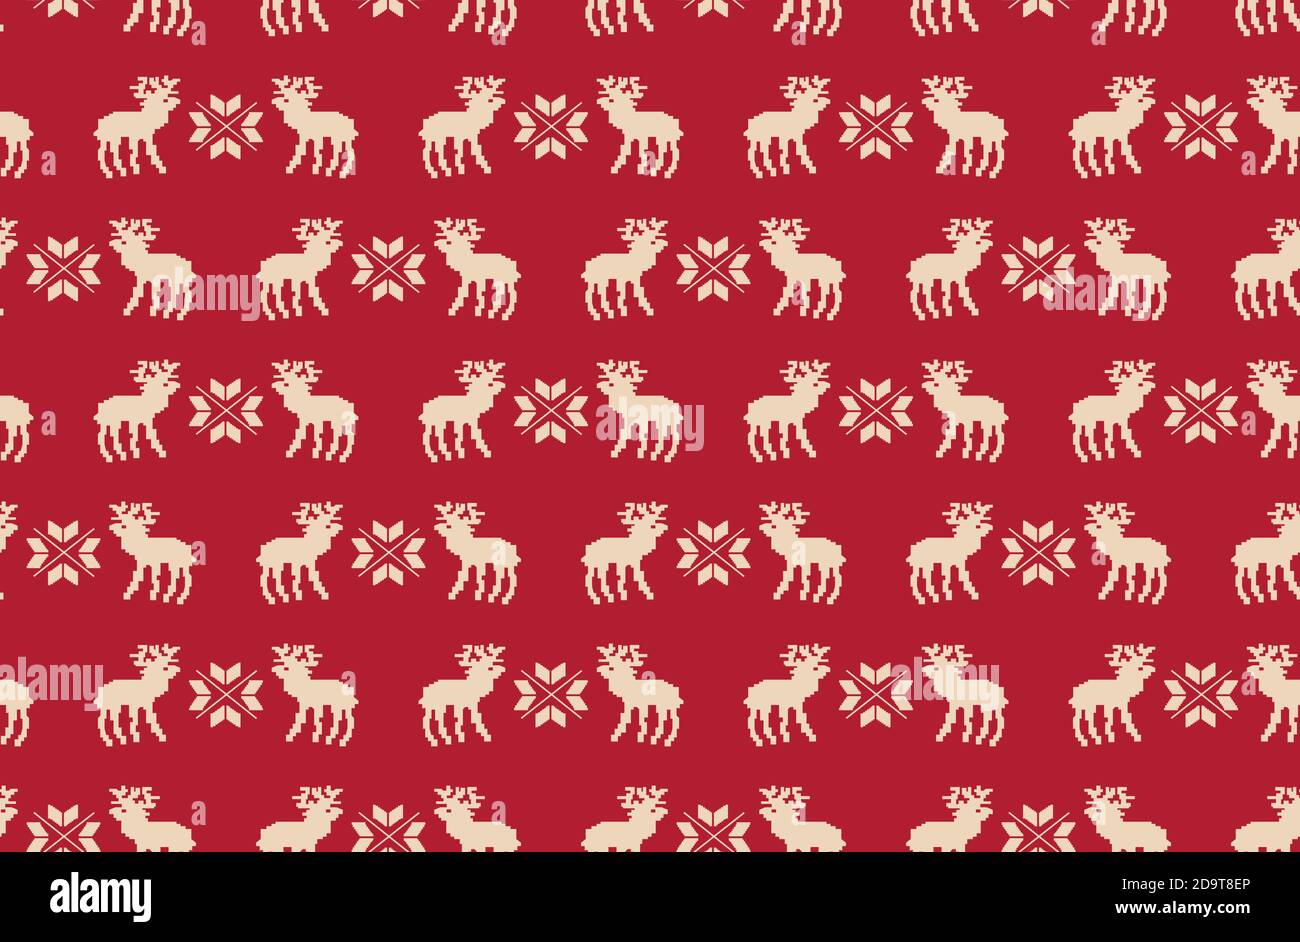 Seamless pattern of Christmas reindeer pixel art on a red background. Stock Vector